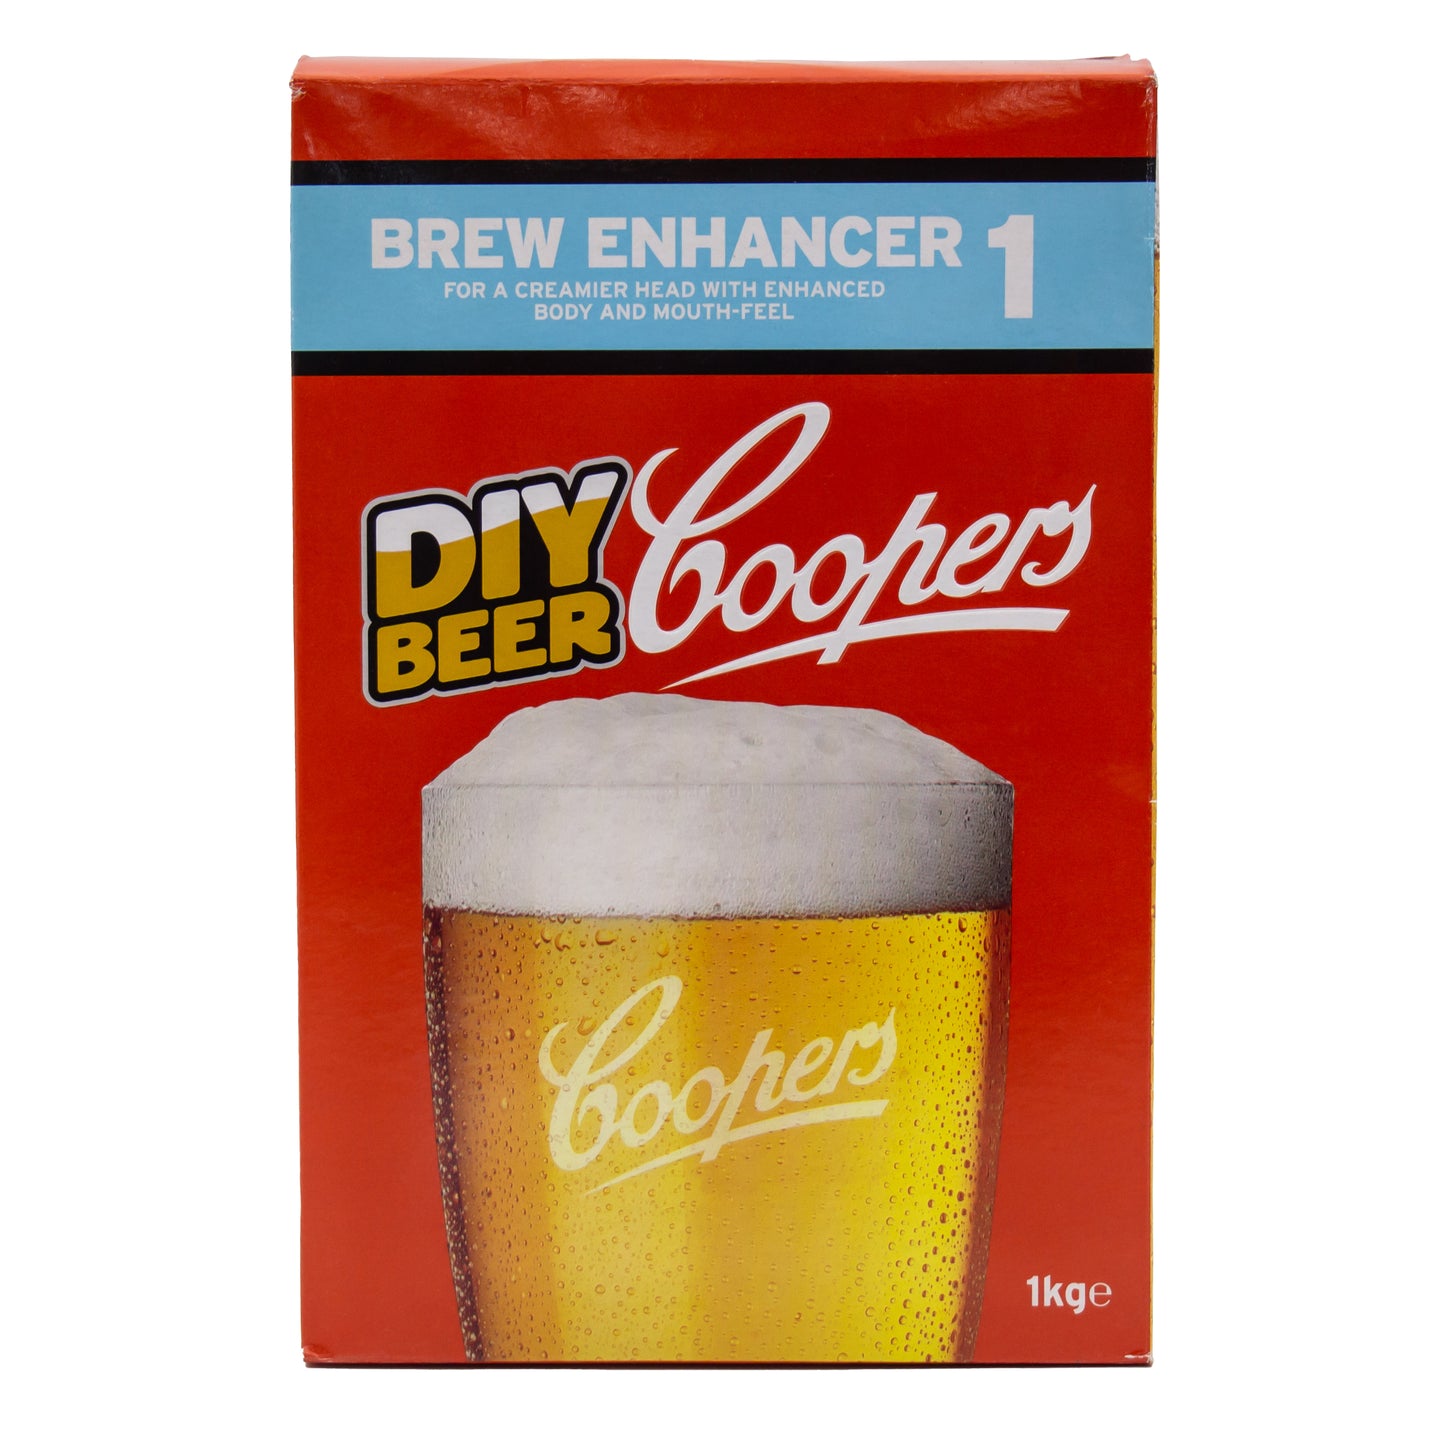 Box of Coopers brew enhancer 1 for home brewing